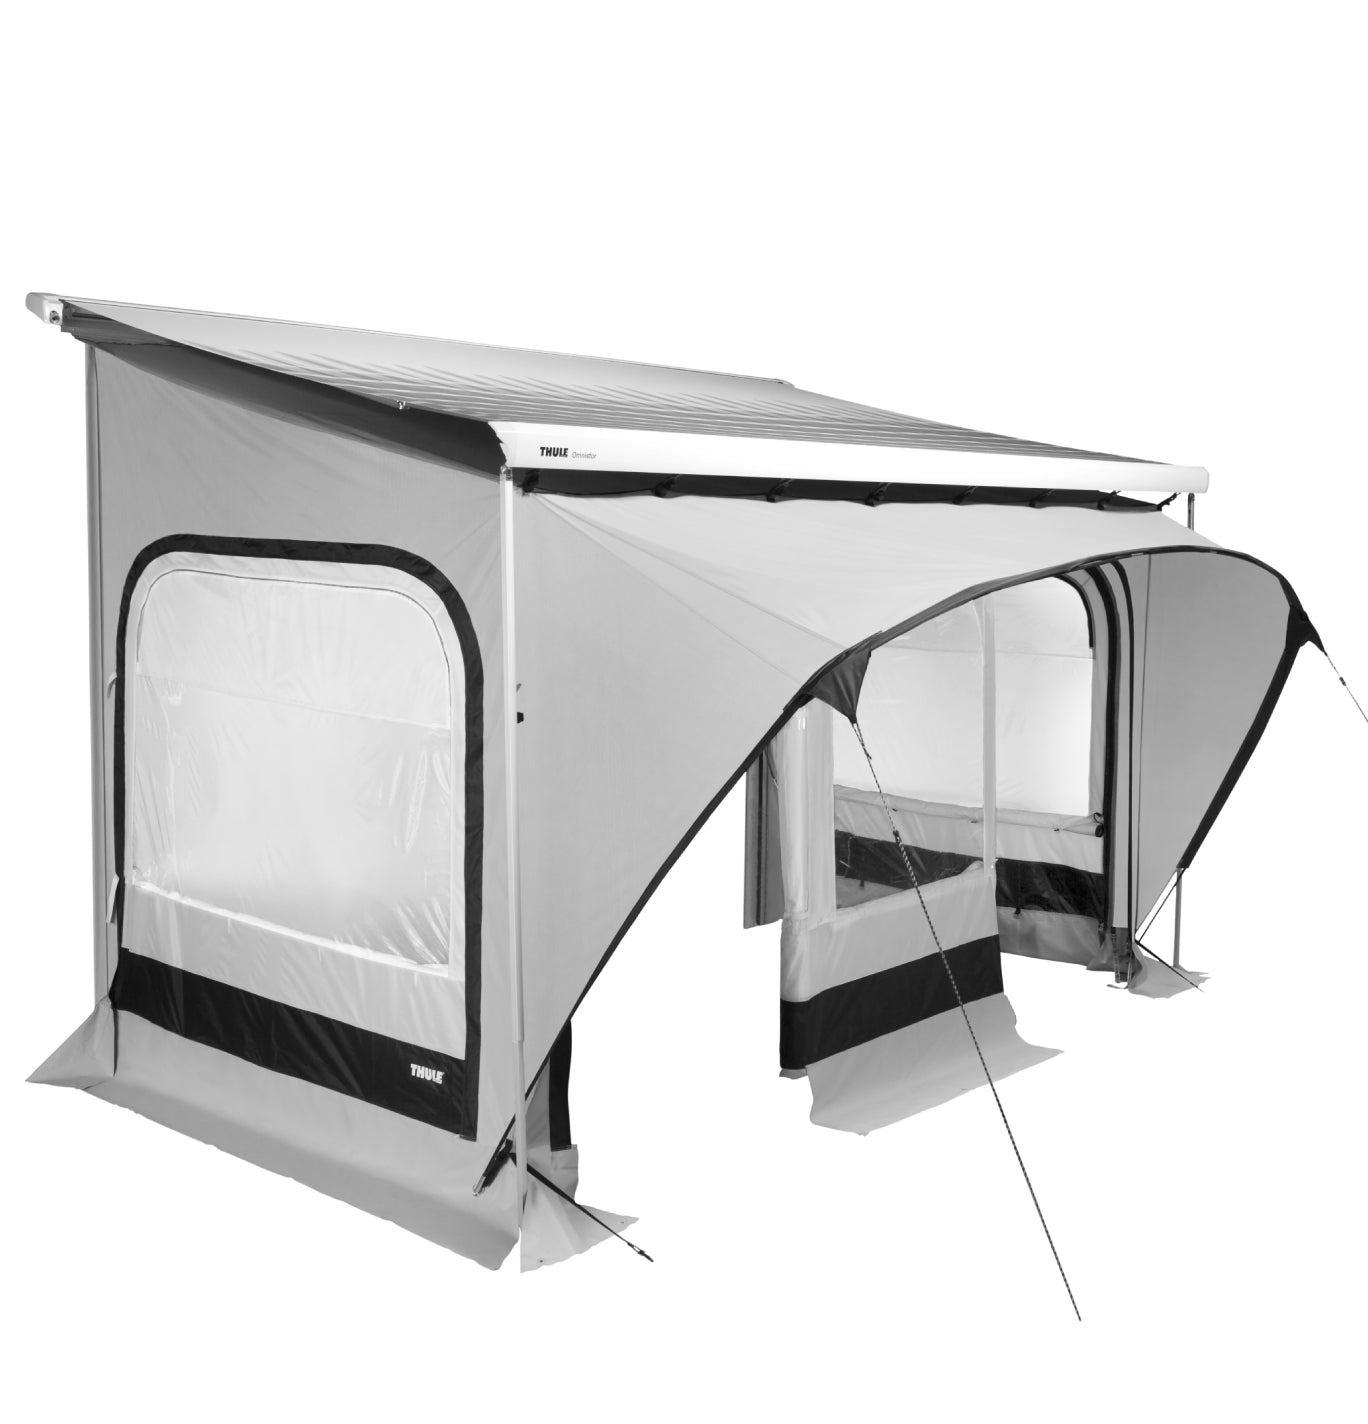 Thule QuickFit Awning Tent Privacy Room